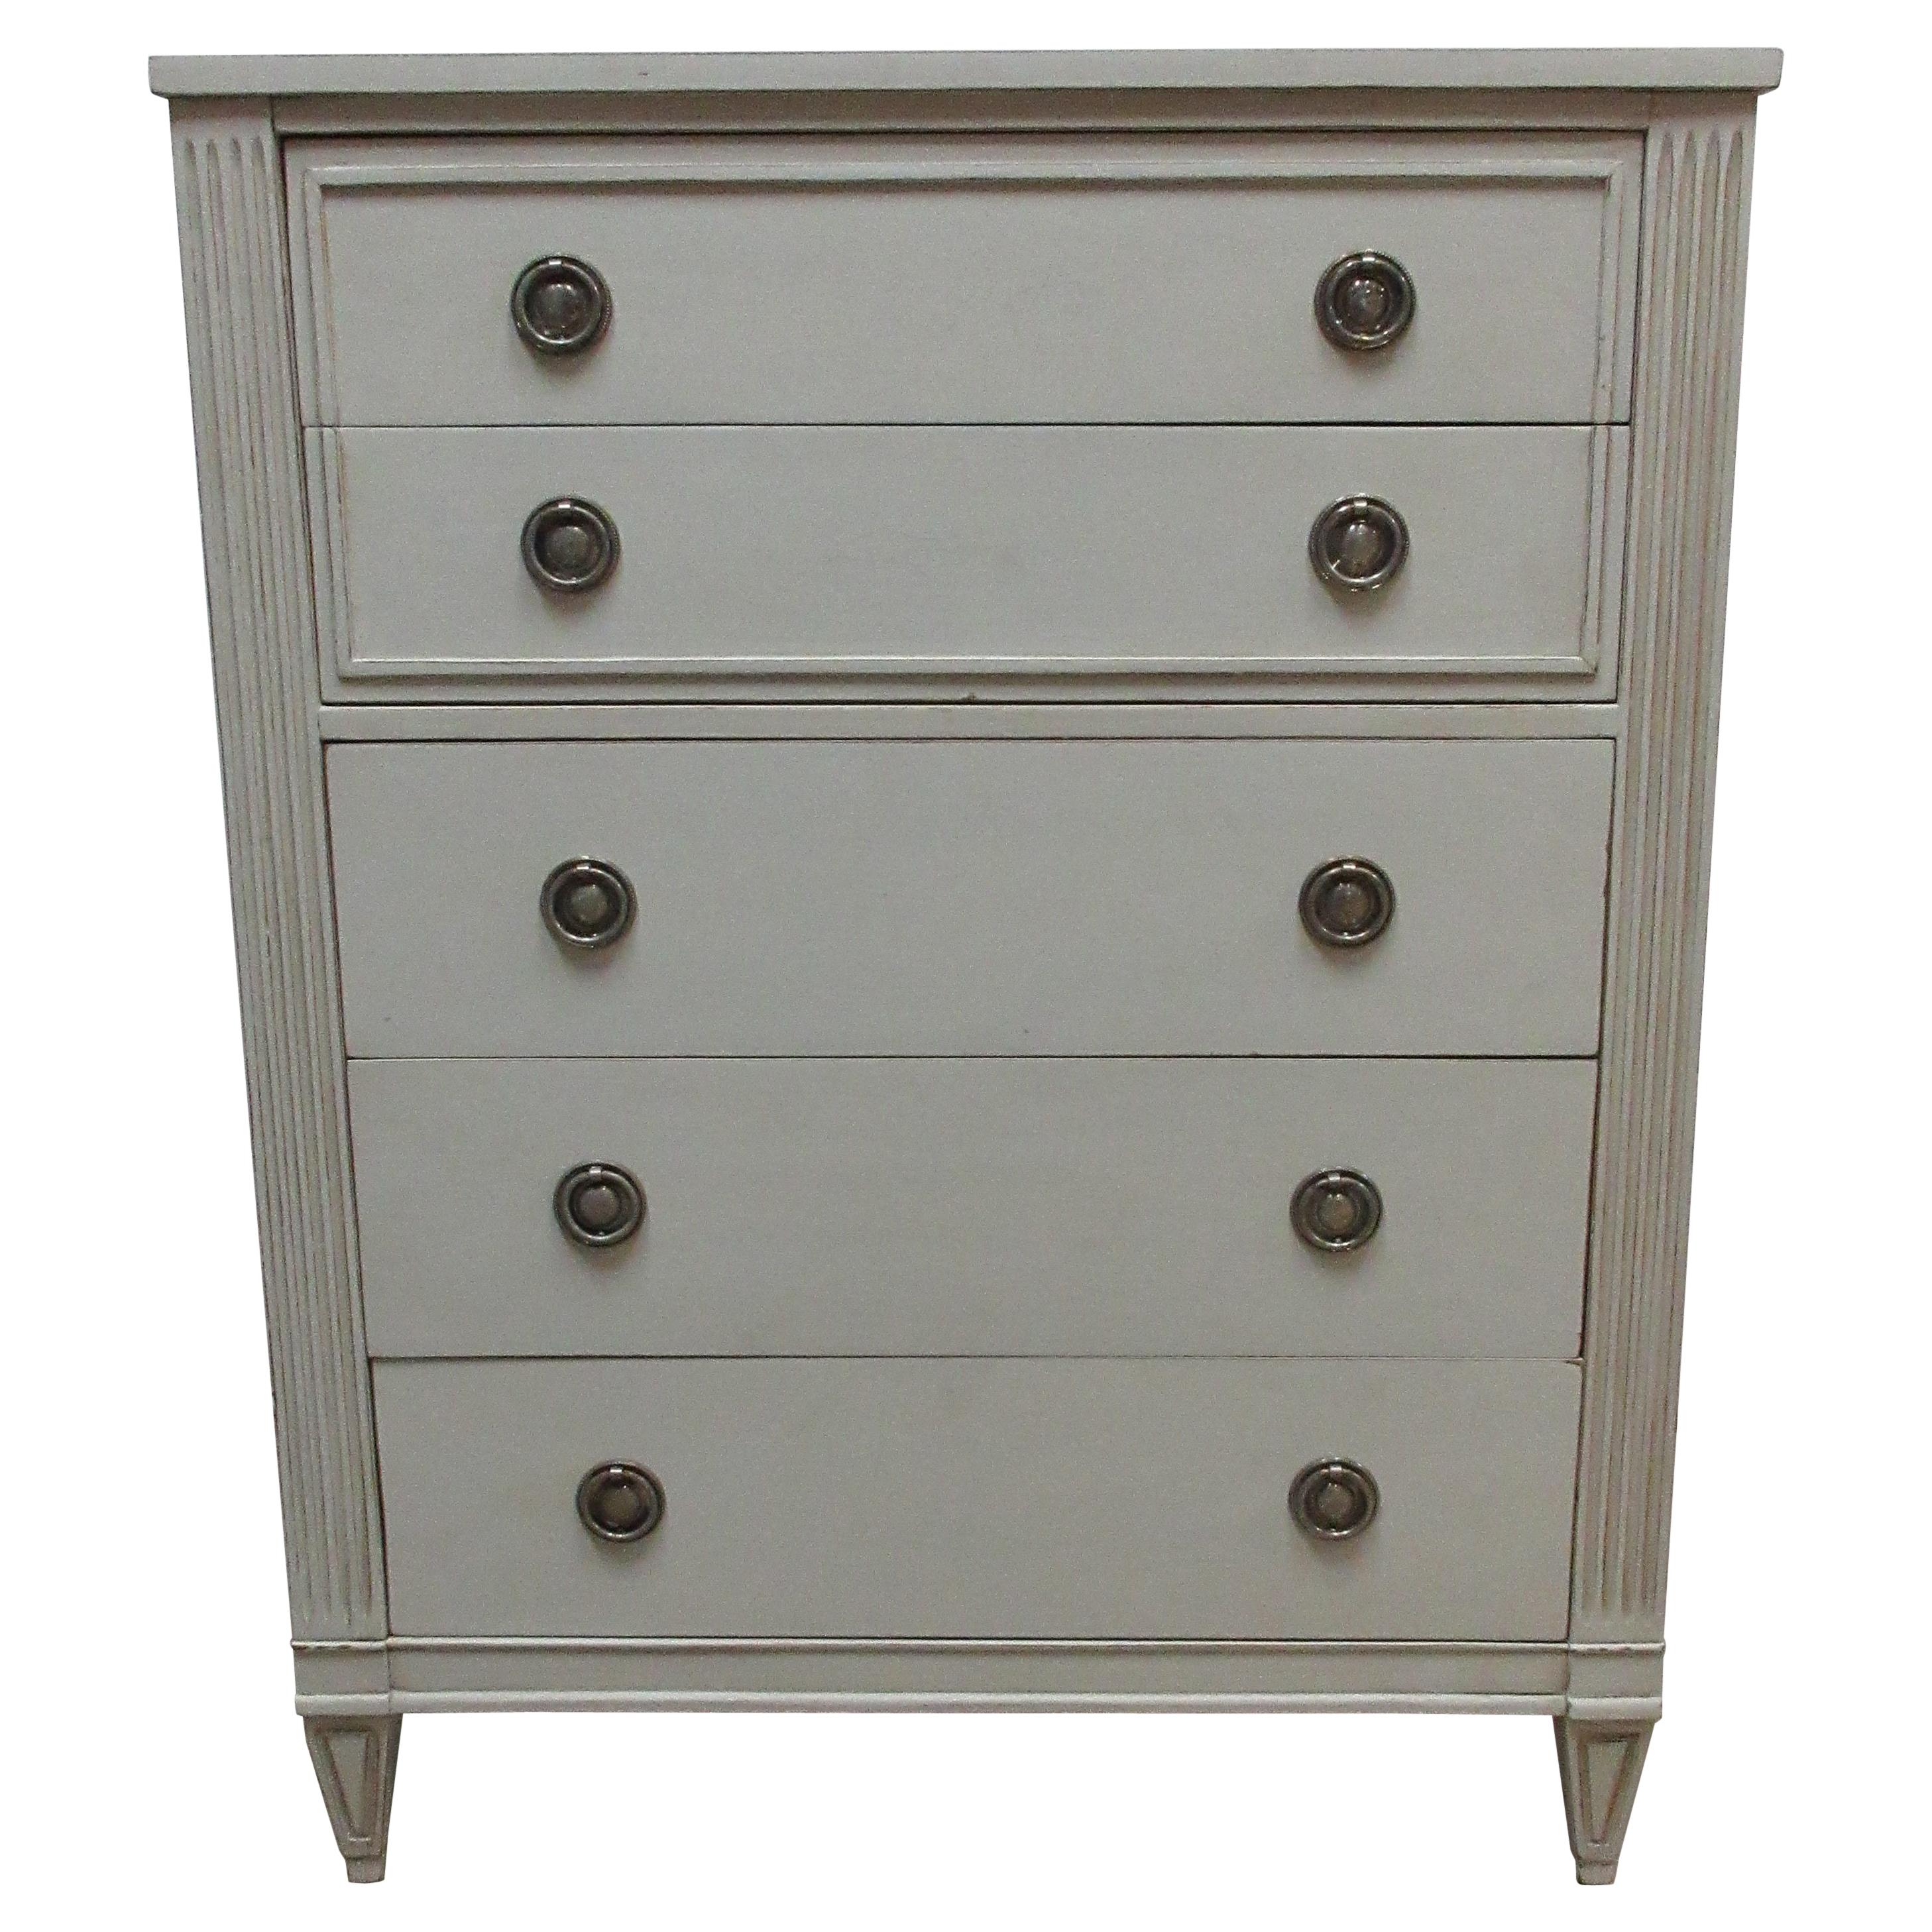 Gustavian 5 Drawer Chest of Drawers